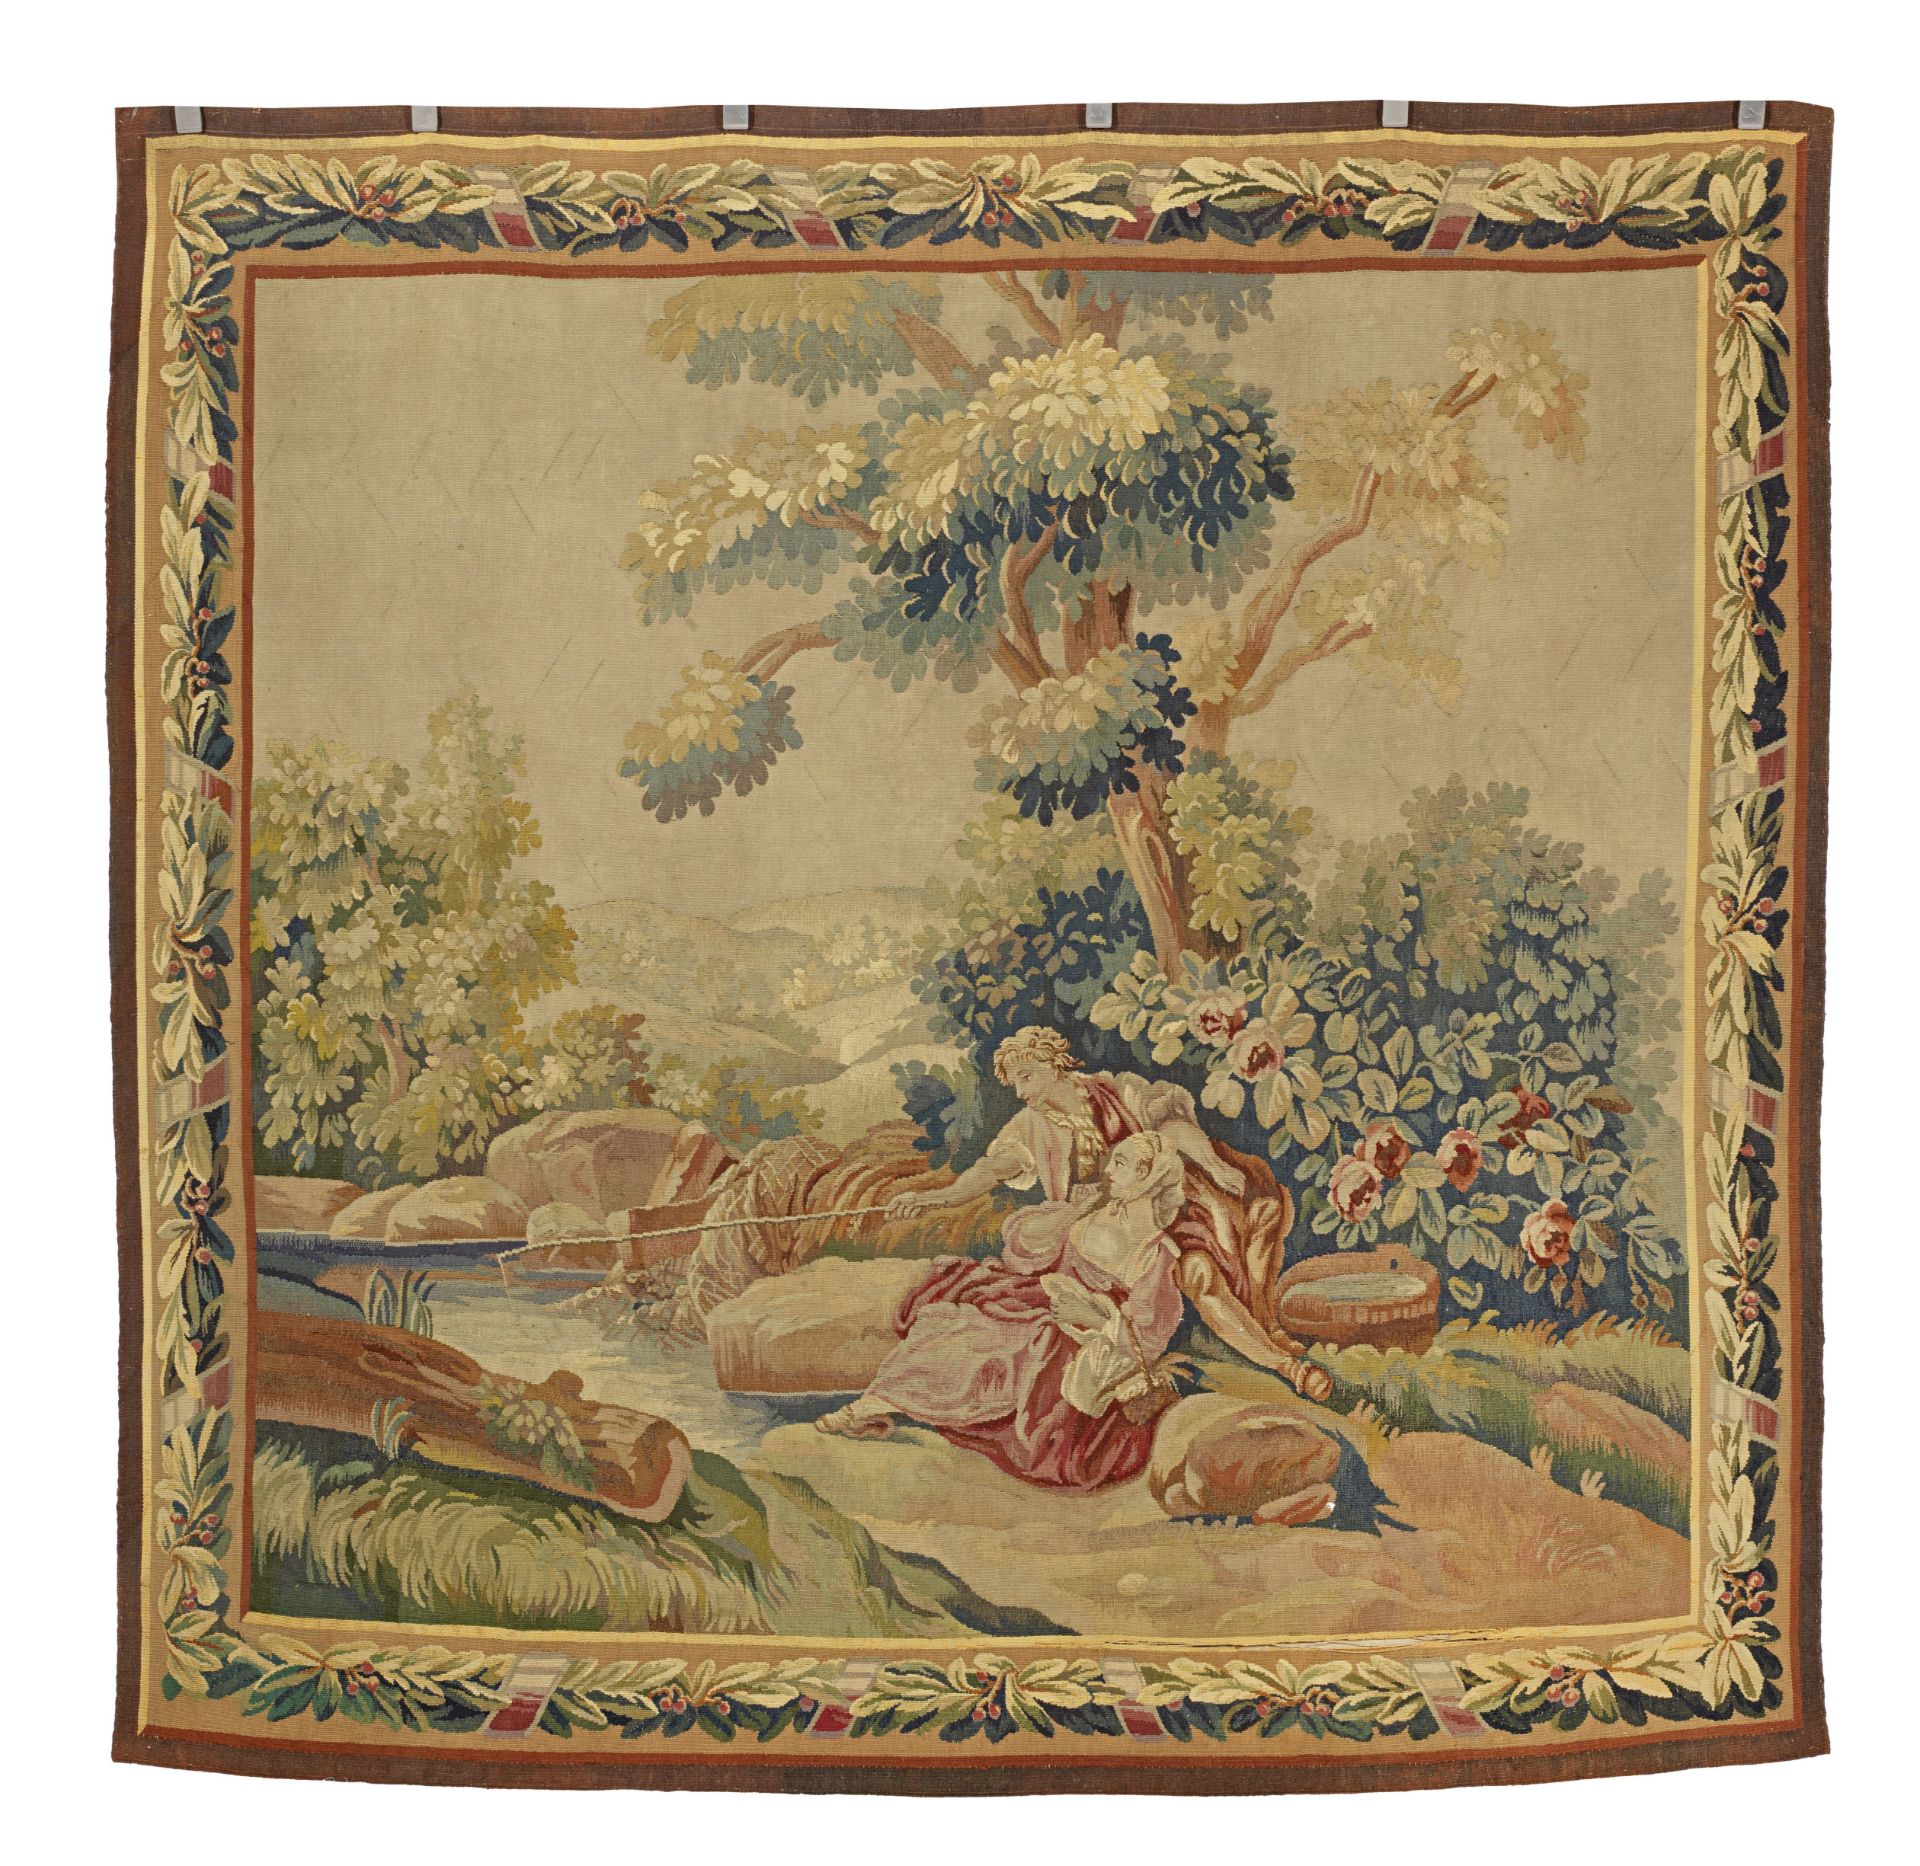 An Aubusson tapestry probably late 18th century 218cm x 214.5cm